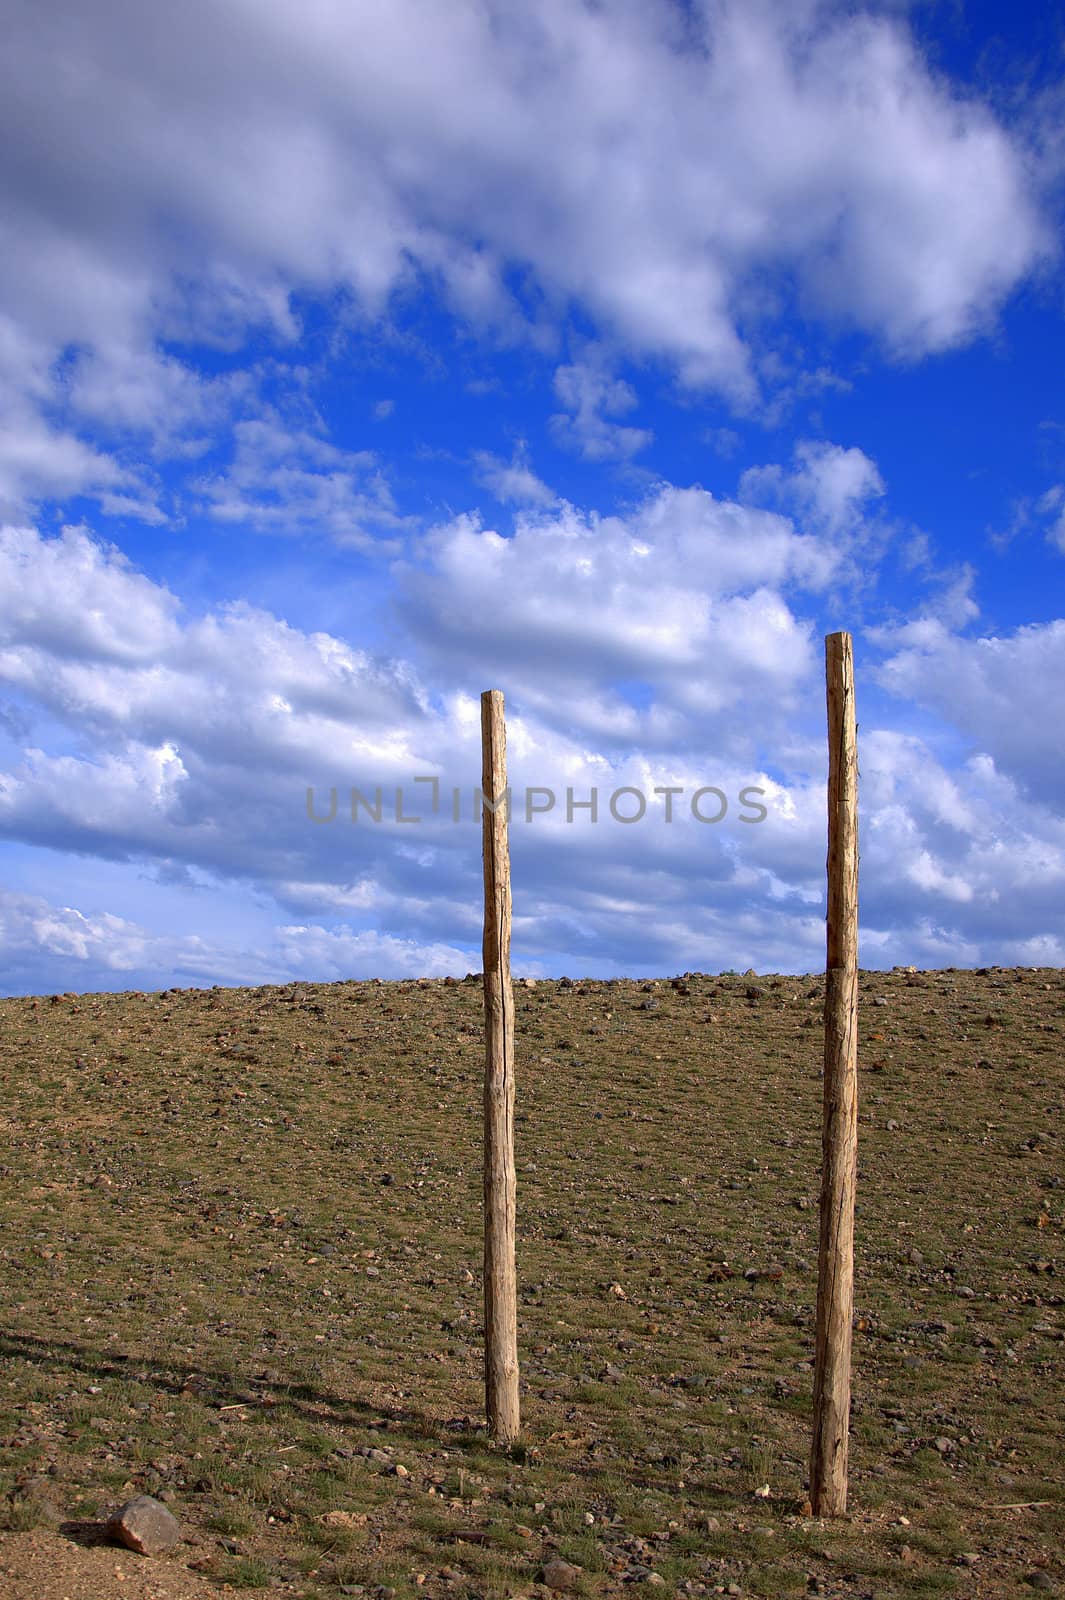 Wooden poles for harnessing horses among the steppe. Kurai steppe, Altai, Siberia, Russia.